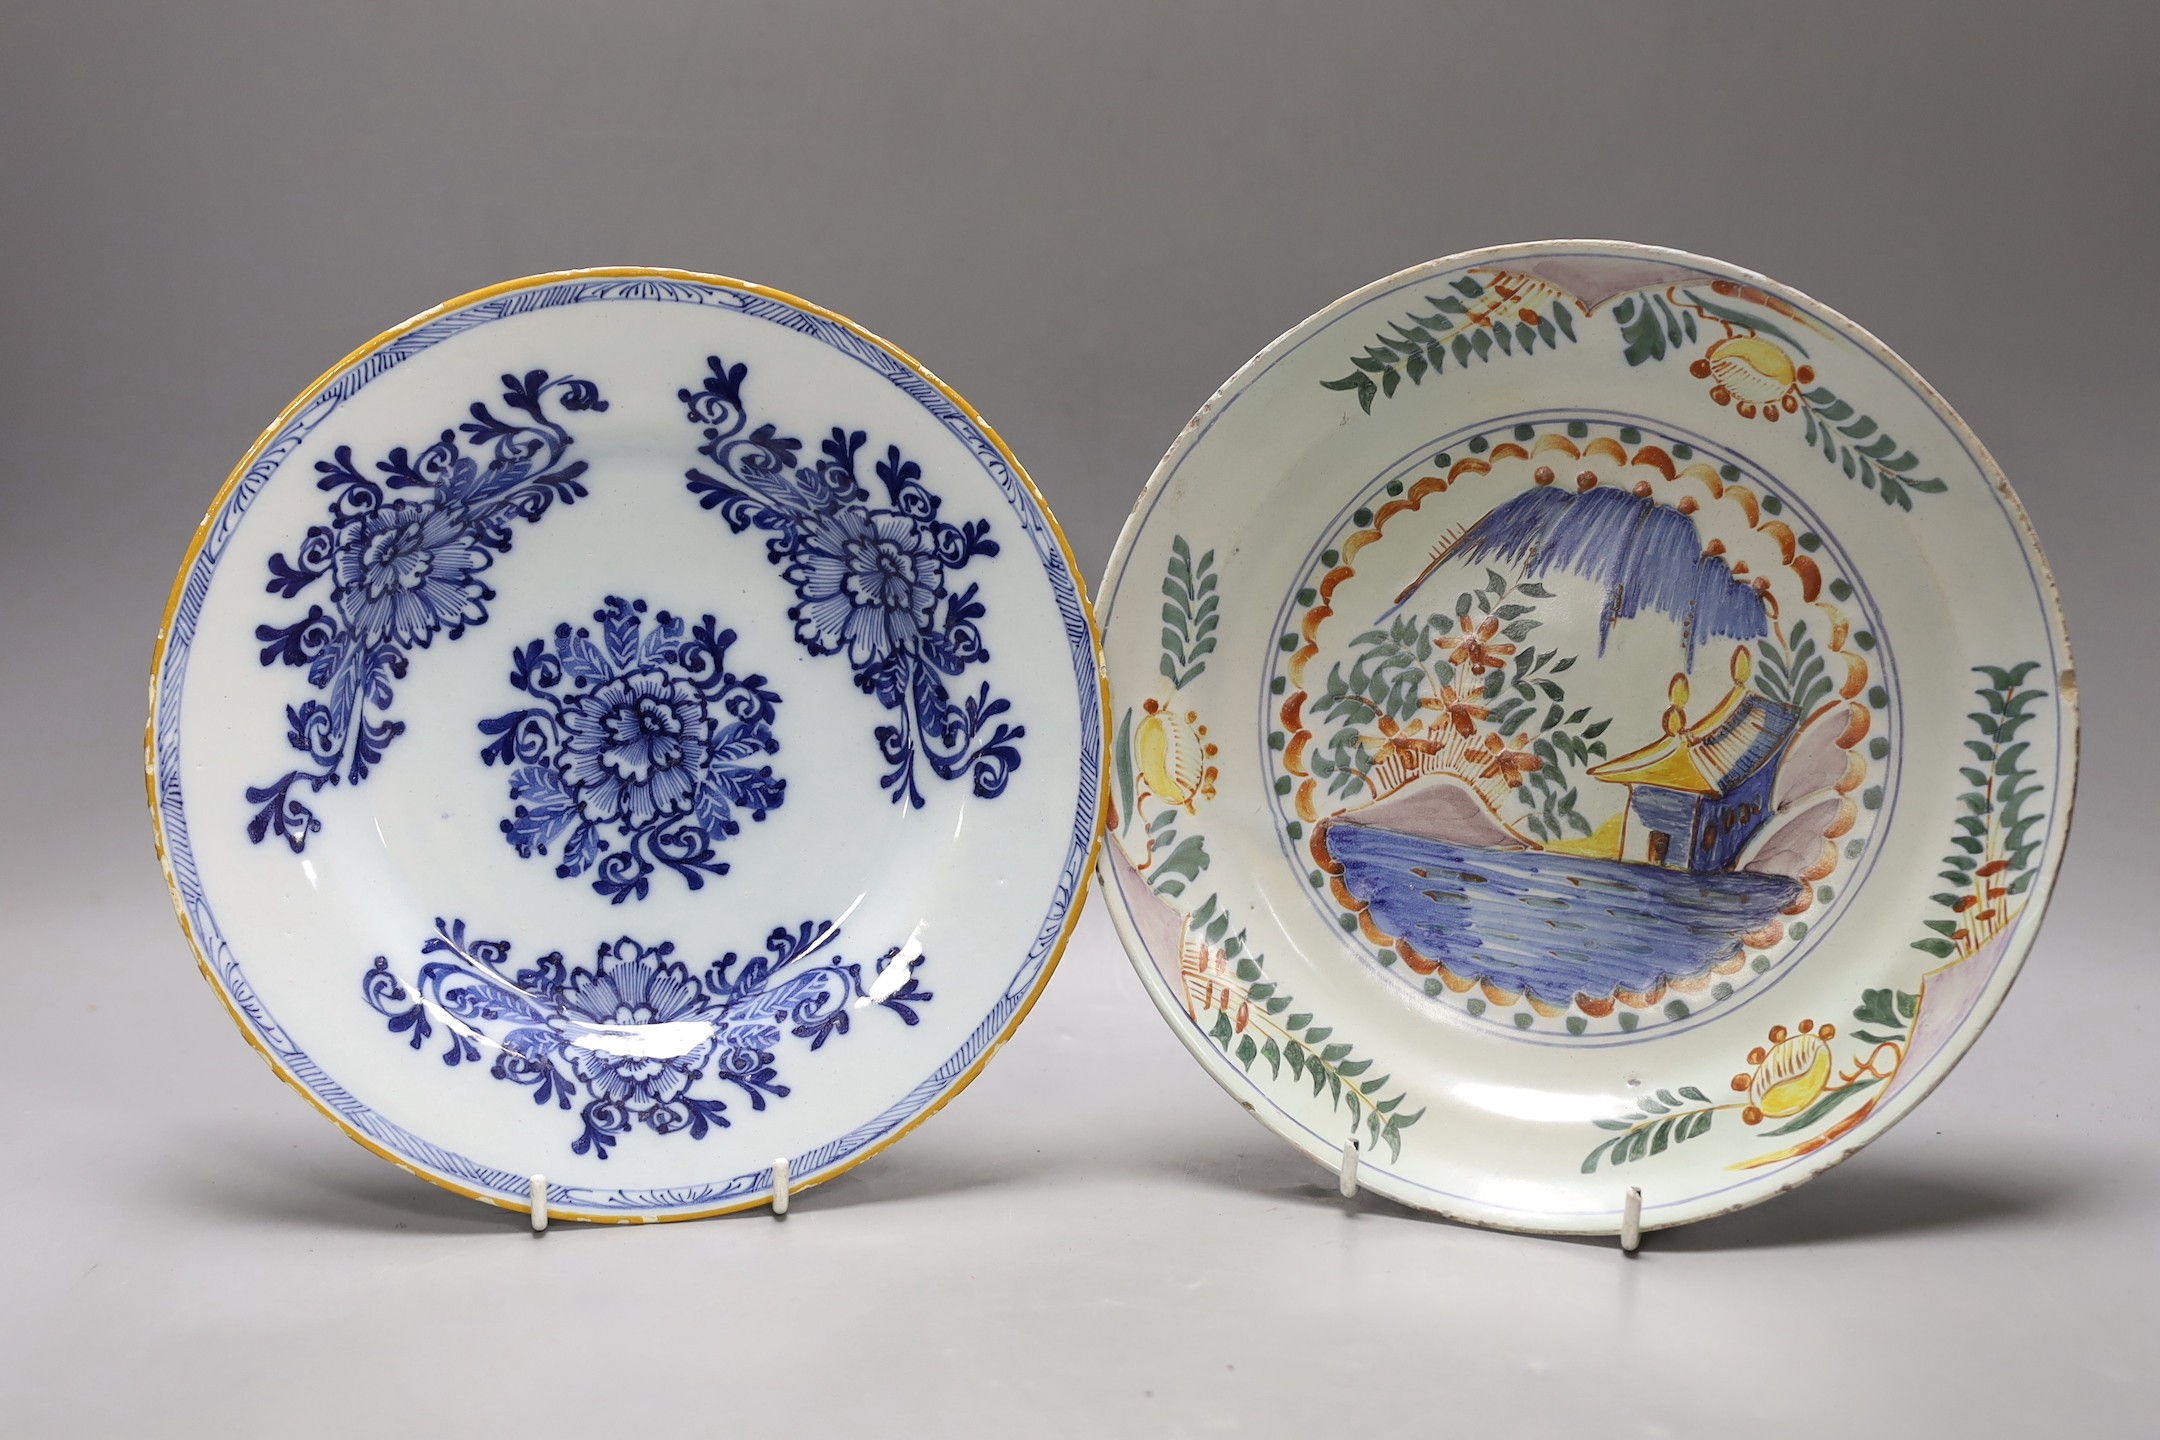 An early 18th century Delft polychrome dish and a mid 18th century Delft blue and white plate, largest 23.5cm diameter